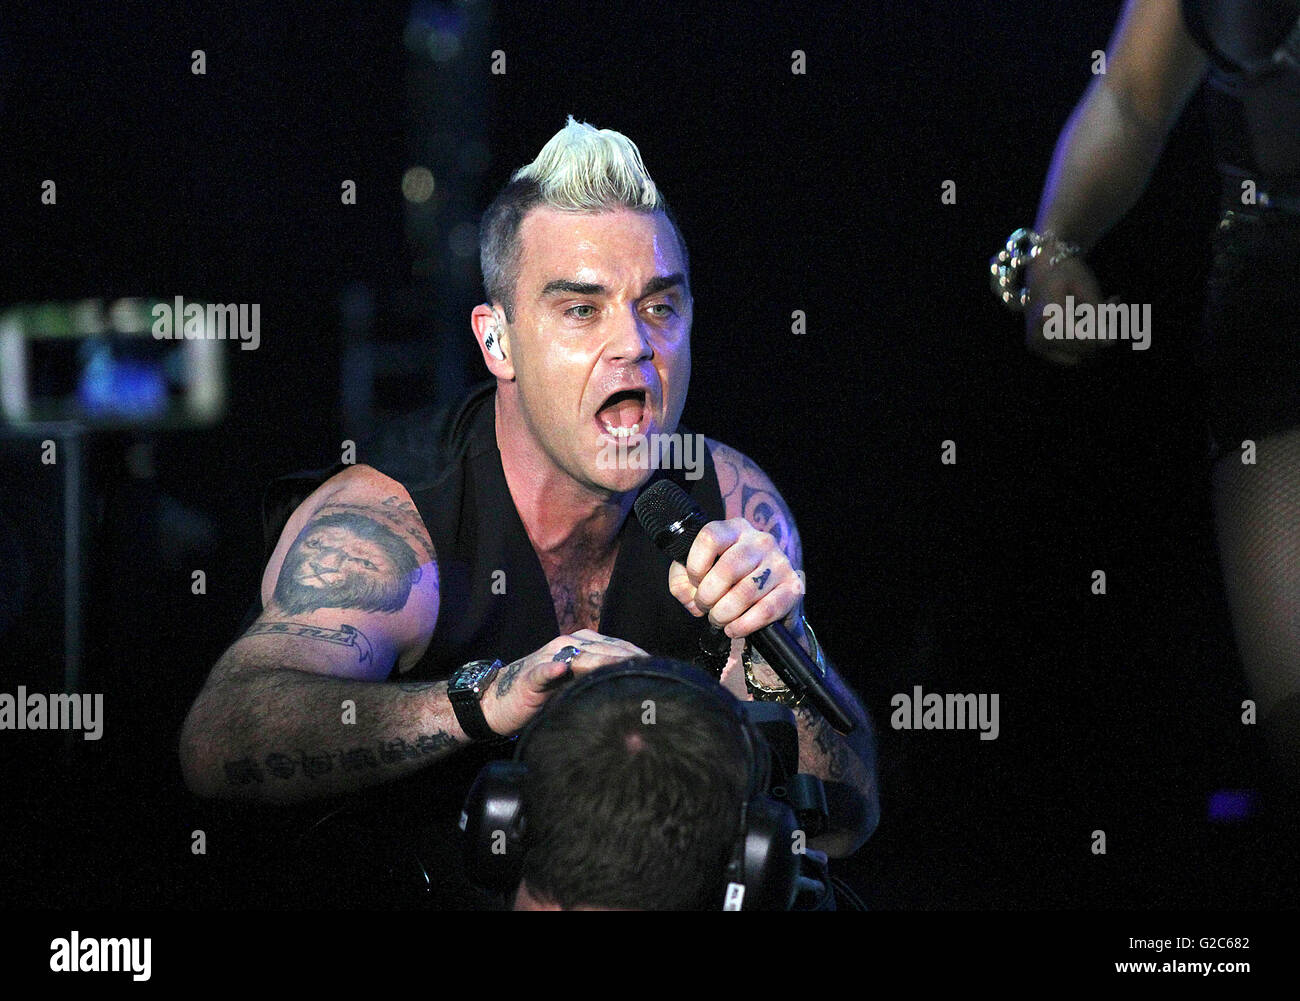 ROBBIE WILLIAMS ,Robert Peter Williams , known as Robbie Williams , is a British singer-songwriter and musician. He began his m Stock Photo